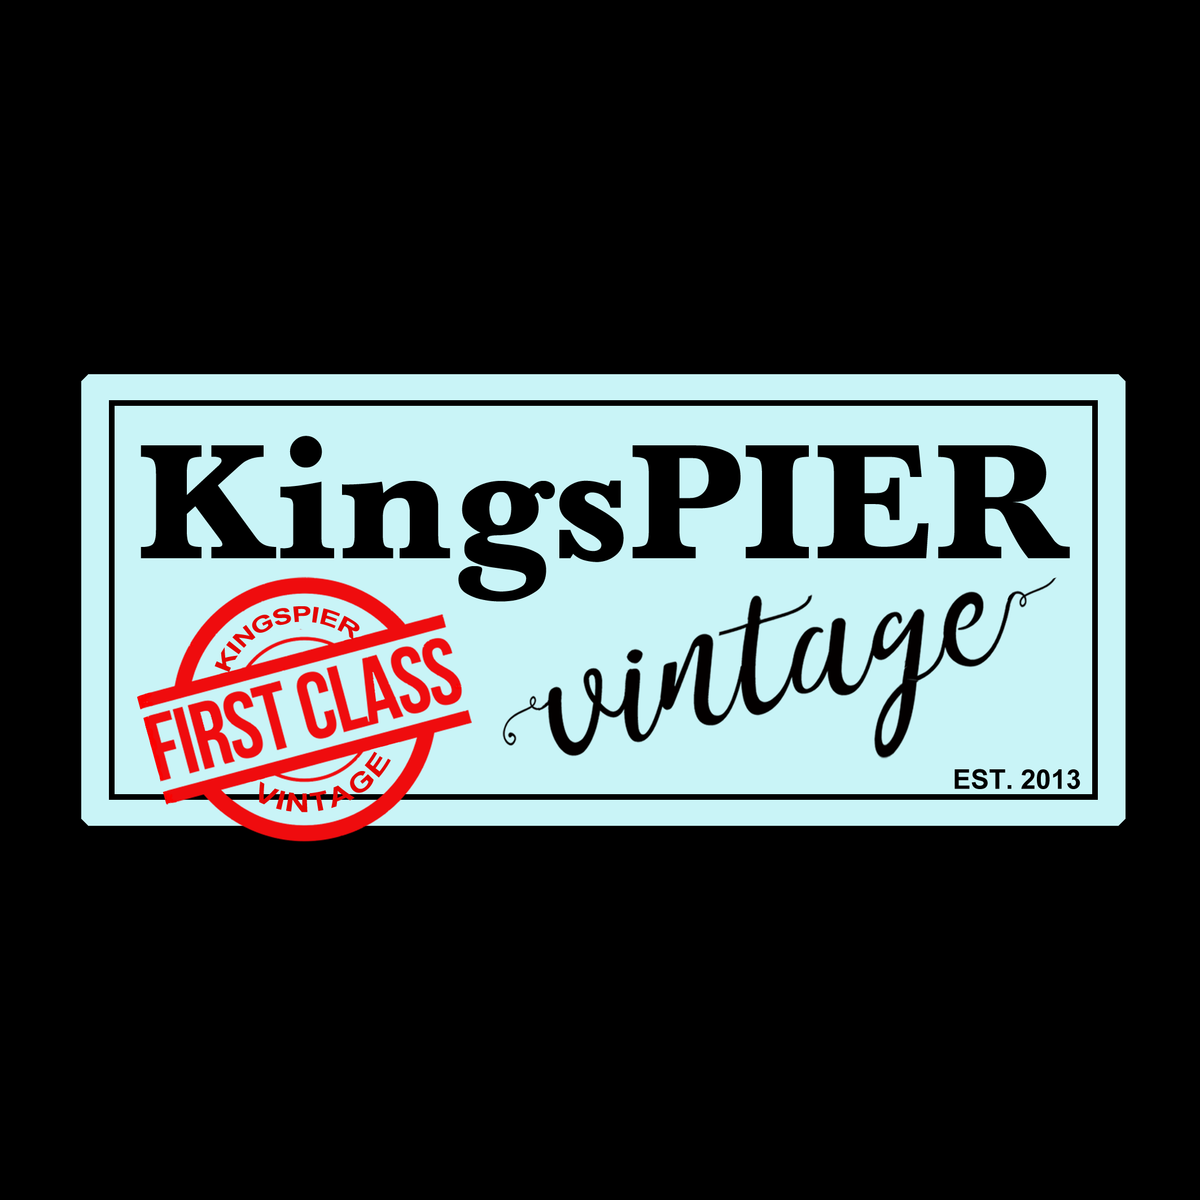 Products – Tagged rice sportswear– KingsPIER vintage